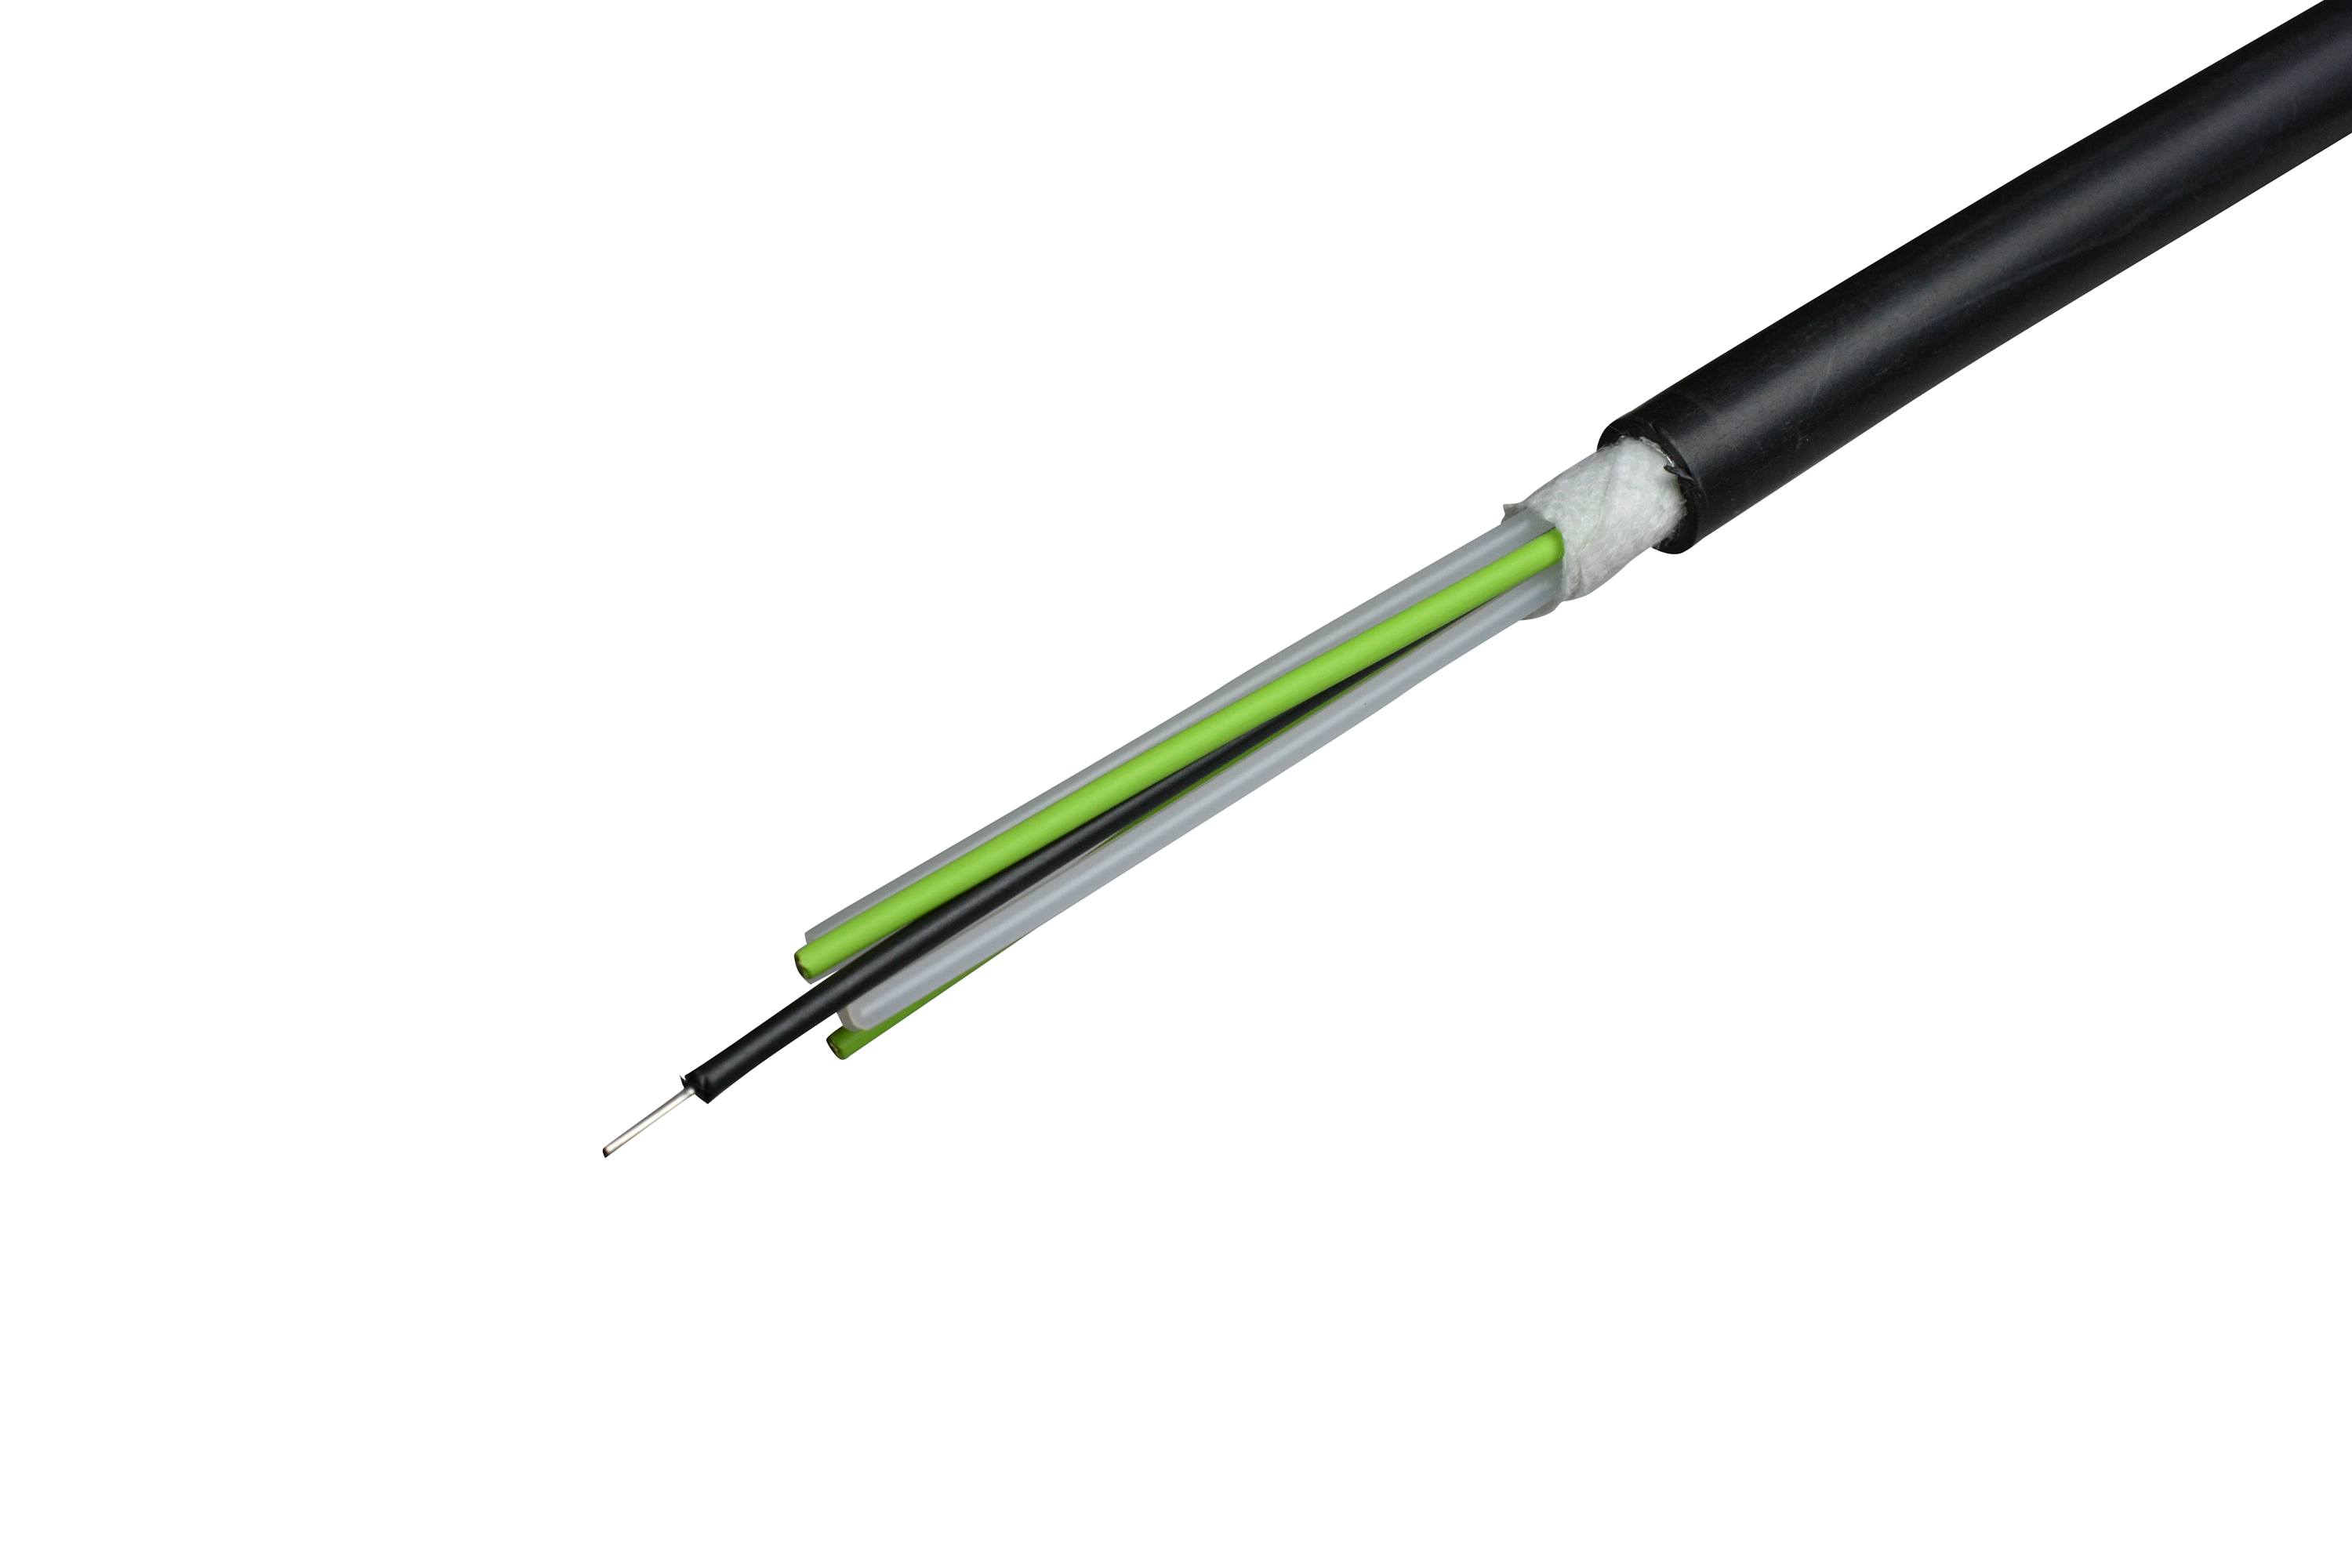 2cores,OM4,Unitized Round Type Fiber Optic Cable for Indoor and OutdoorUse.